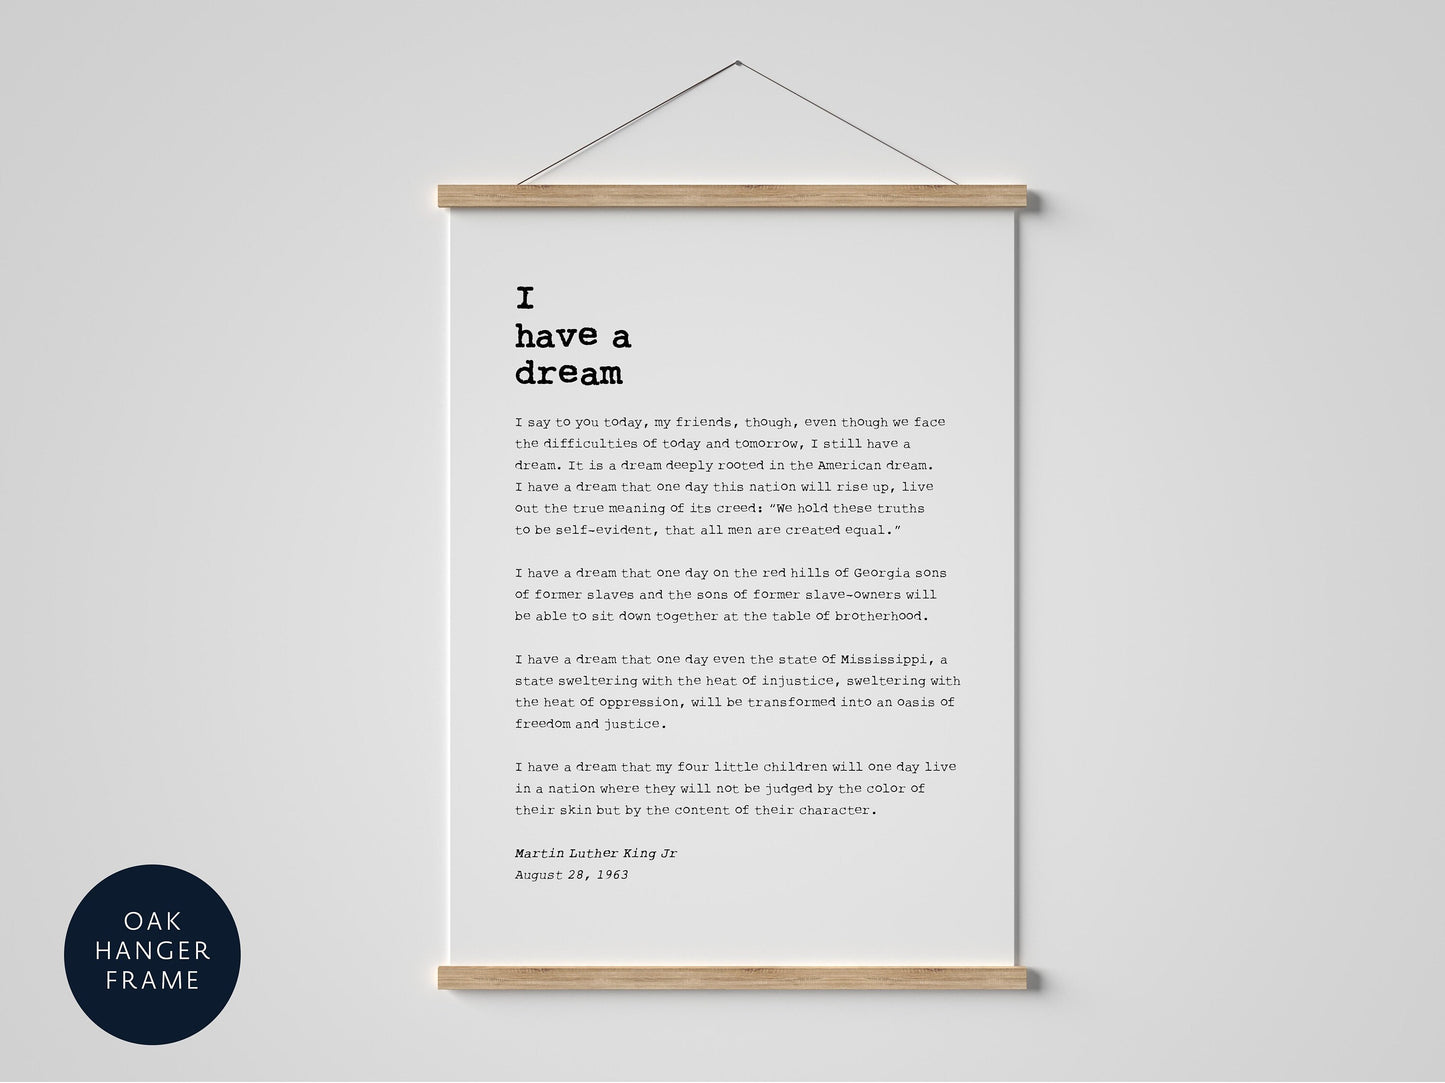 I have a dream quote poster, Speech by Martin Luther King Jr, Framed oak hanger Print